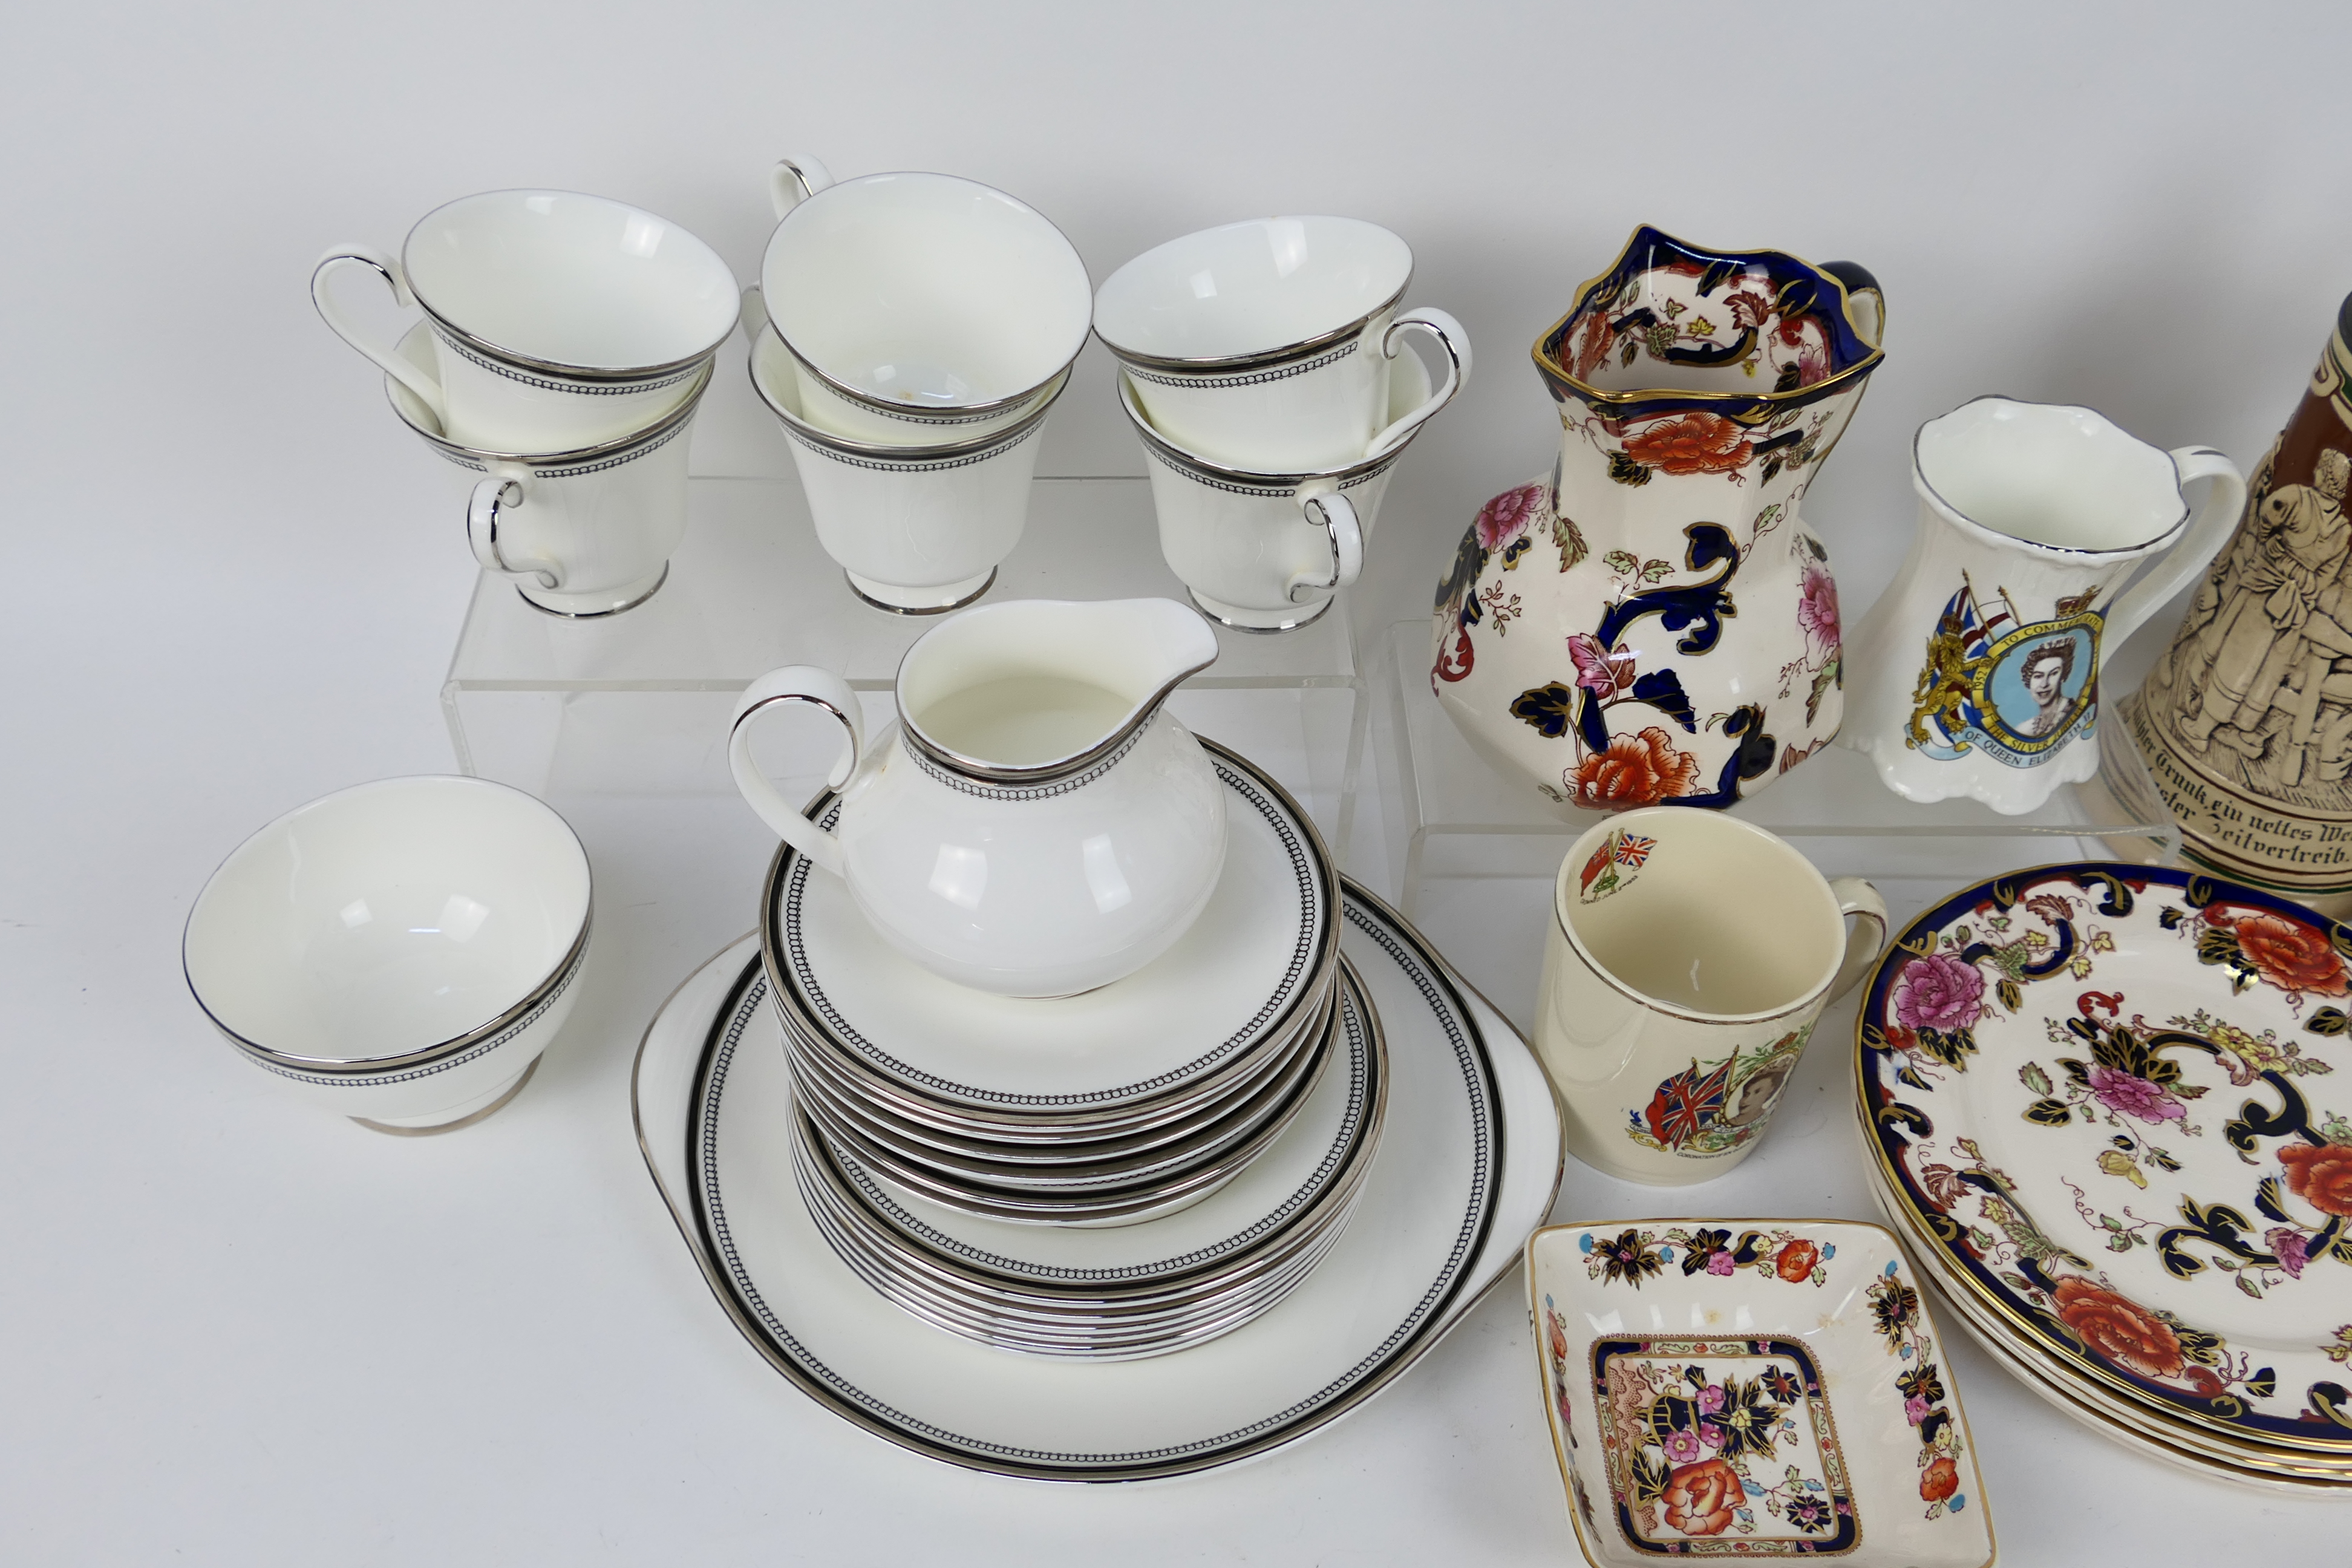 Ceramics to include Royal Doulton tea wares in the Sarabande pattern # H5023, - Image 2 of 5